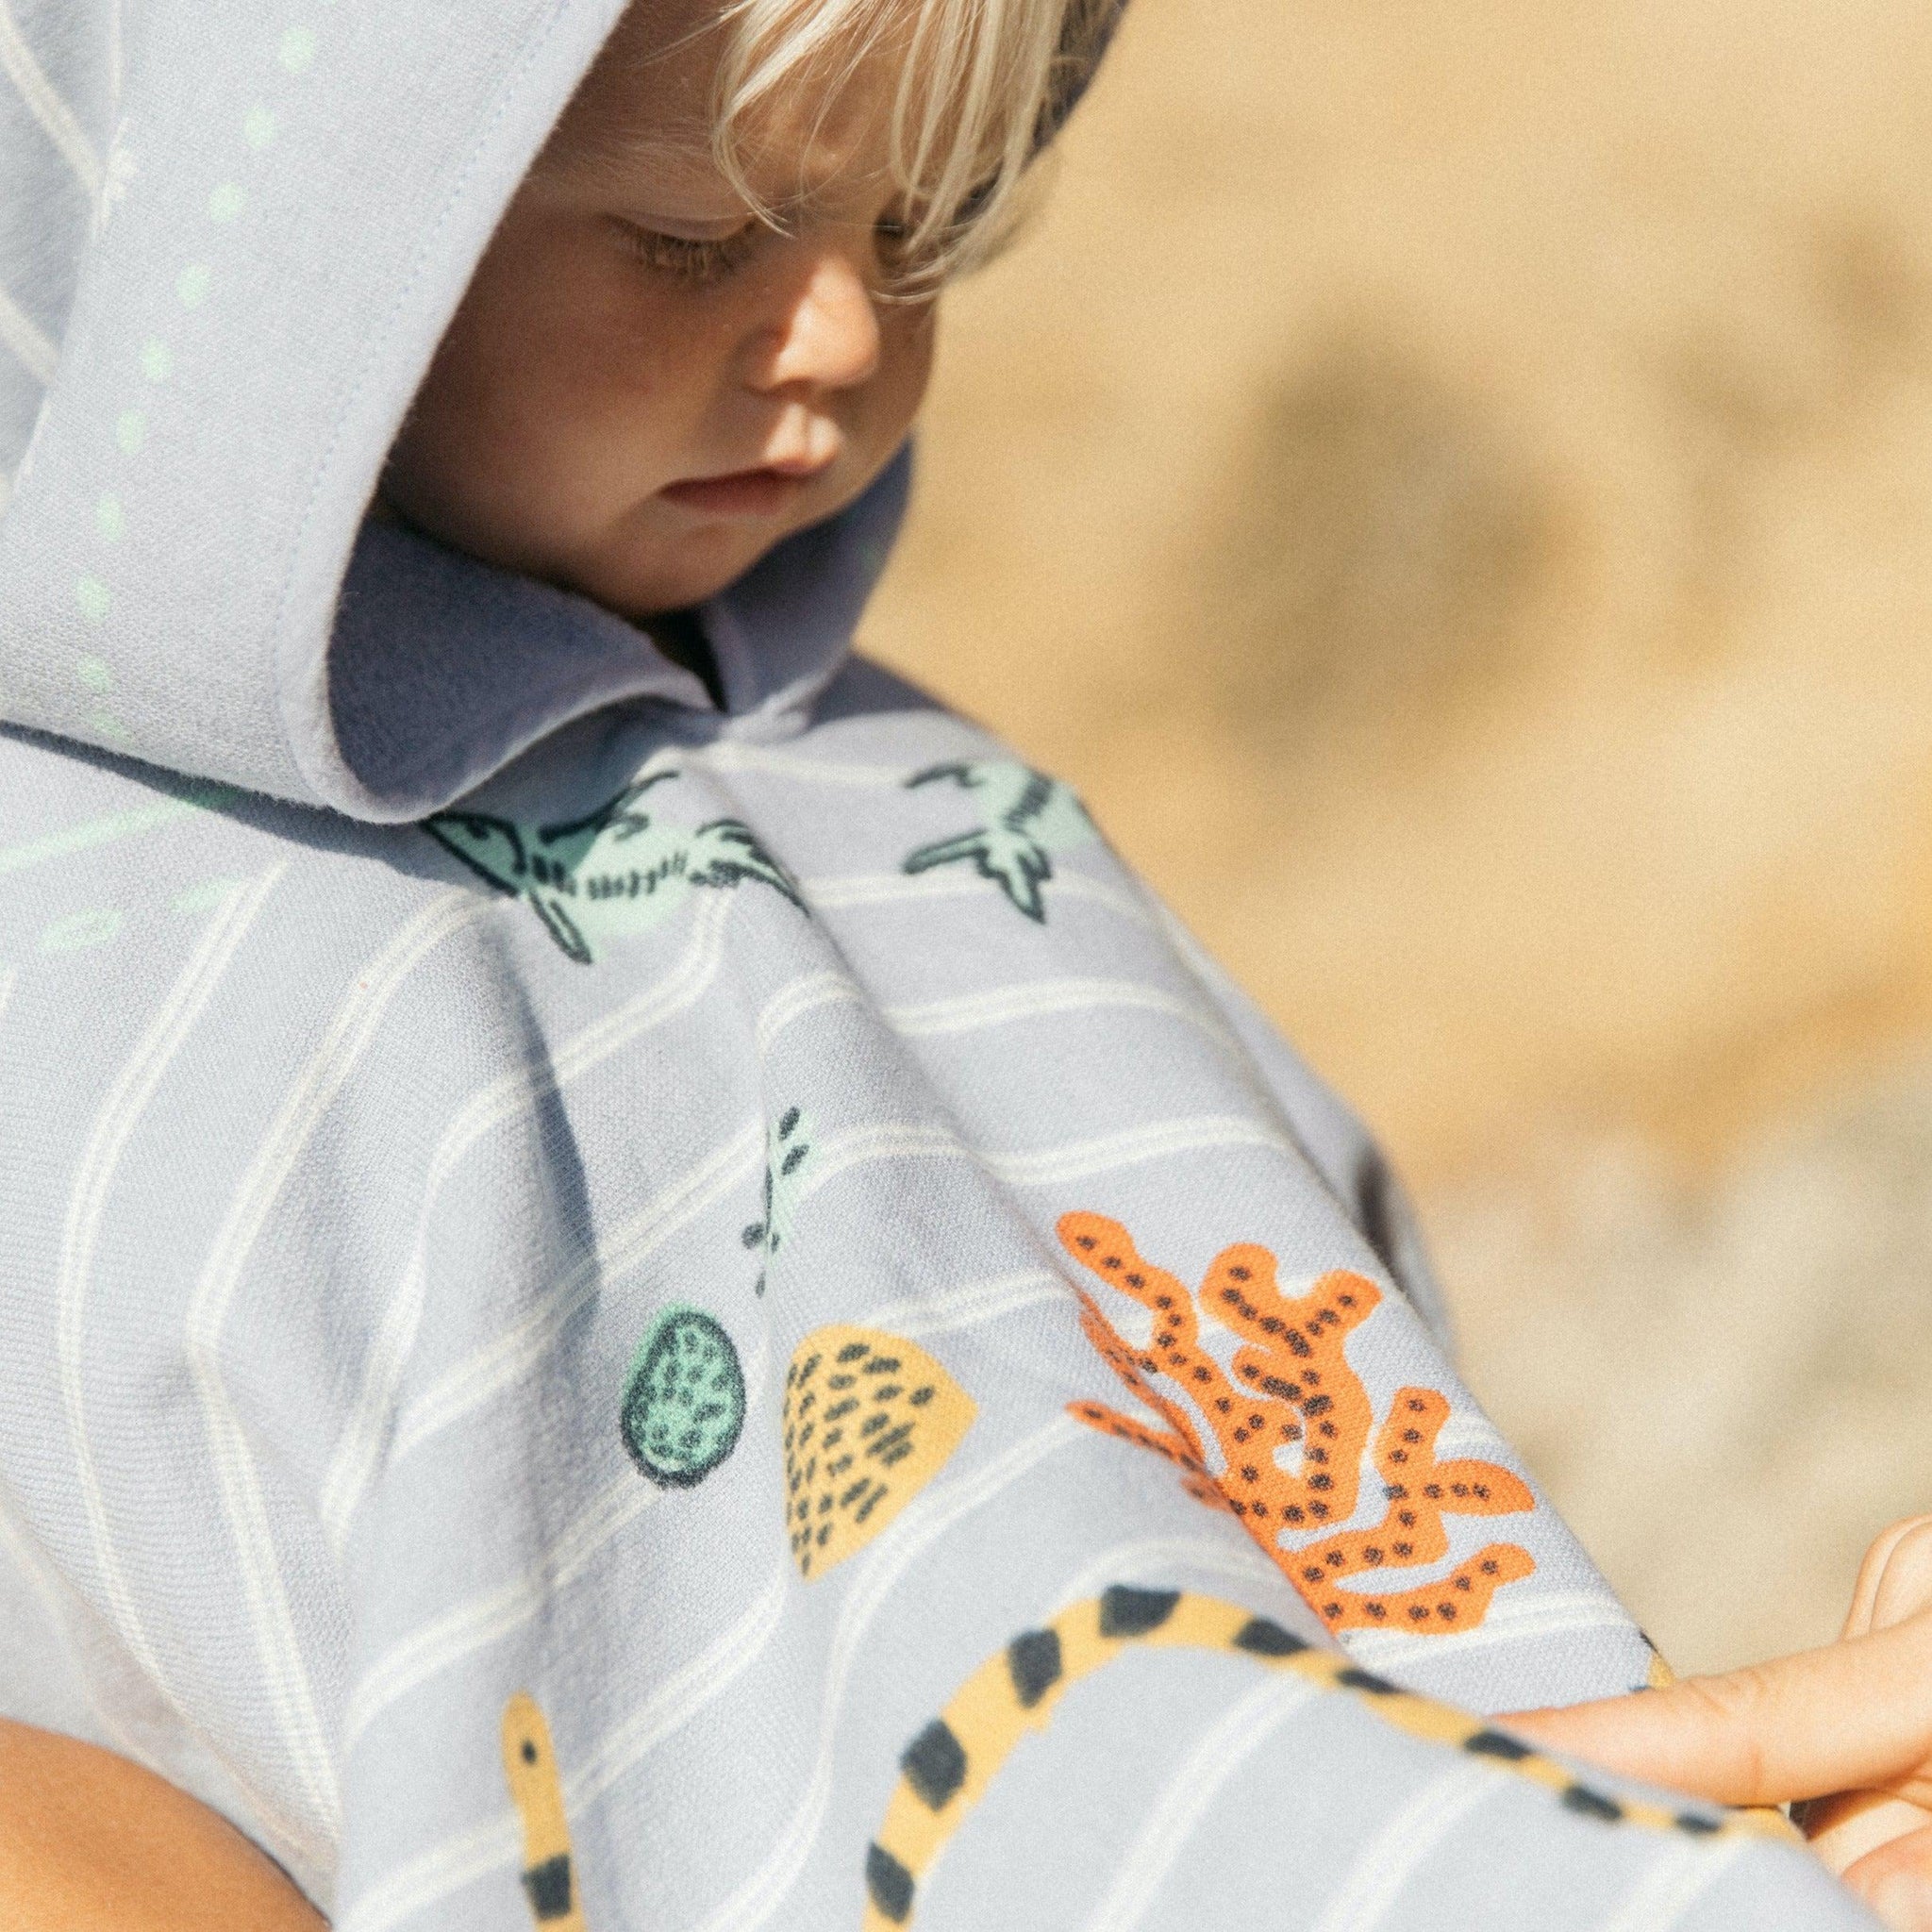 Made from 100% soft cotton, finished with a hood and the signature eyelash fringing, our Buccaneer Petite Poncho features hand illustrated sea creatures to keep your little one's imagination running wild.